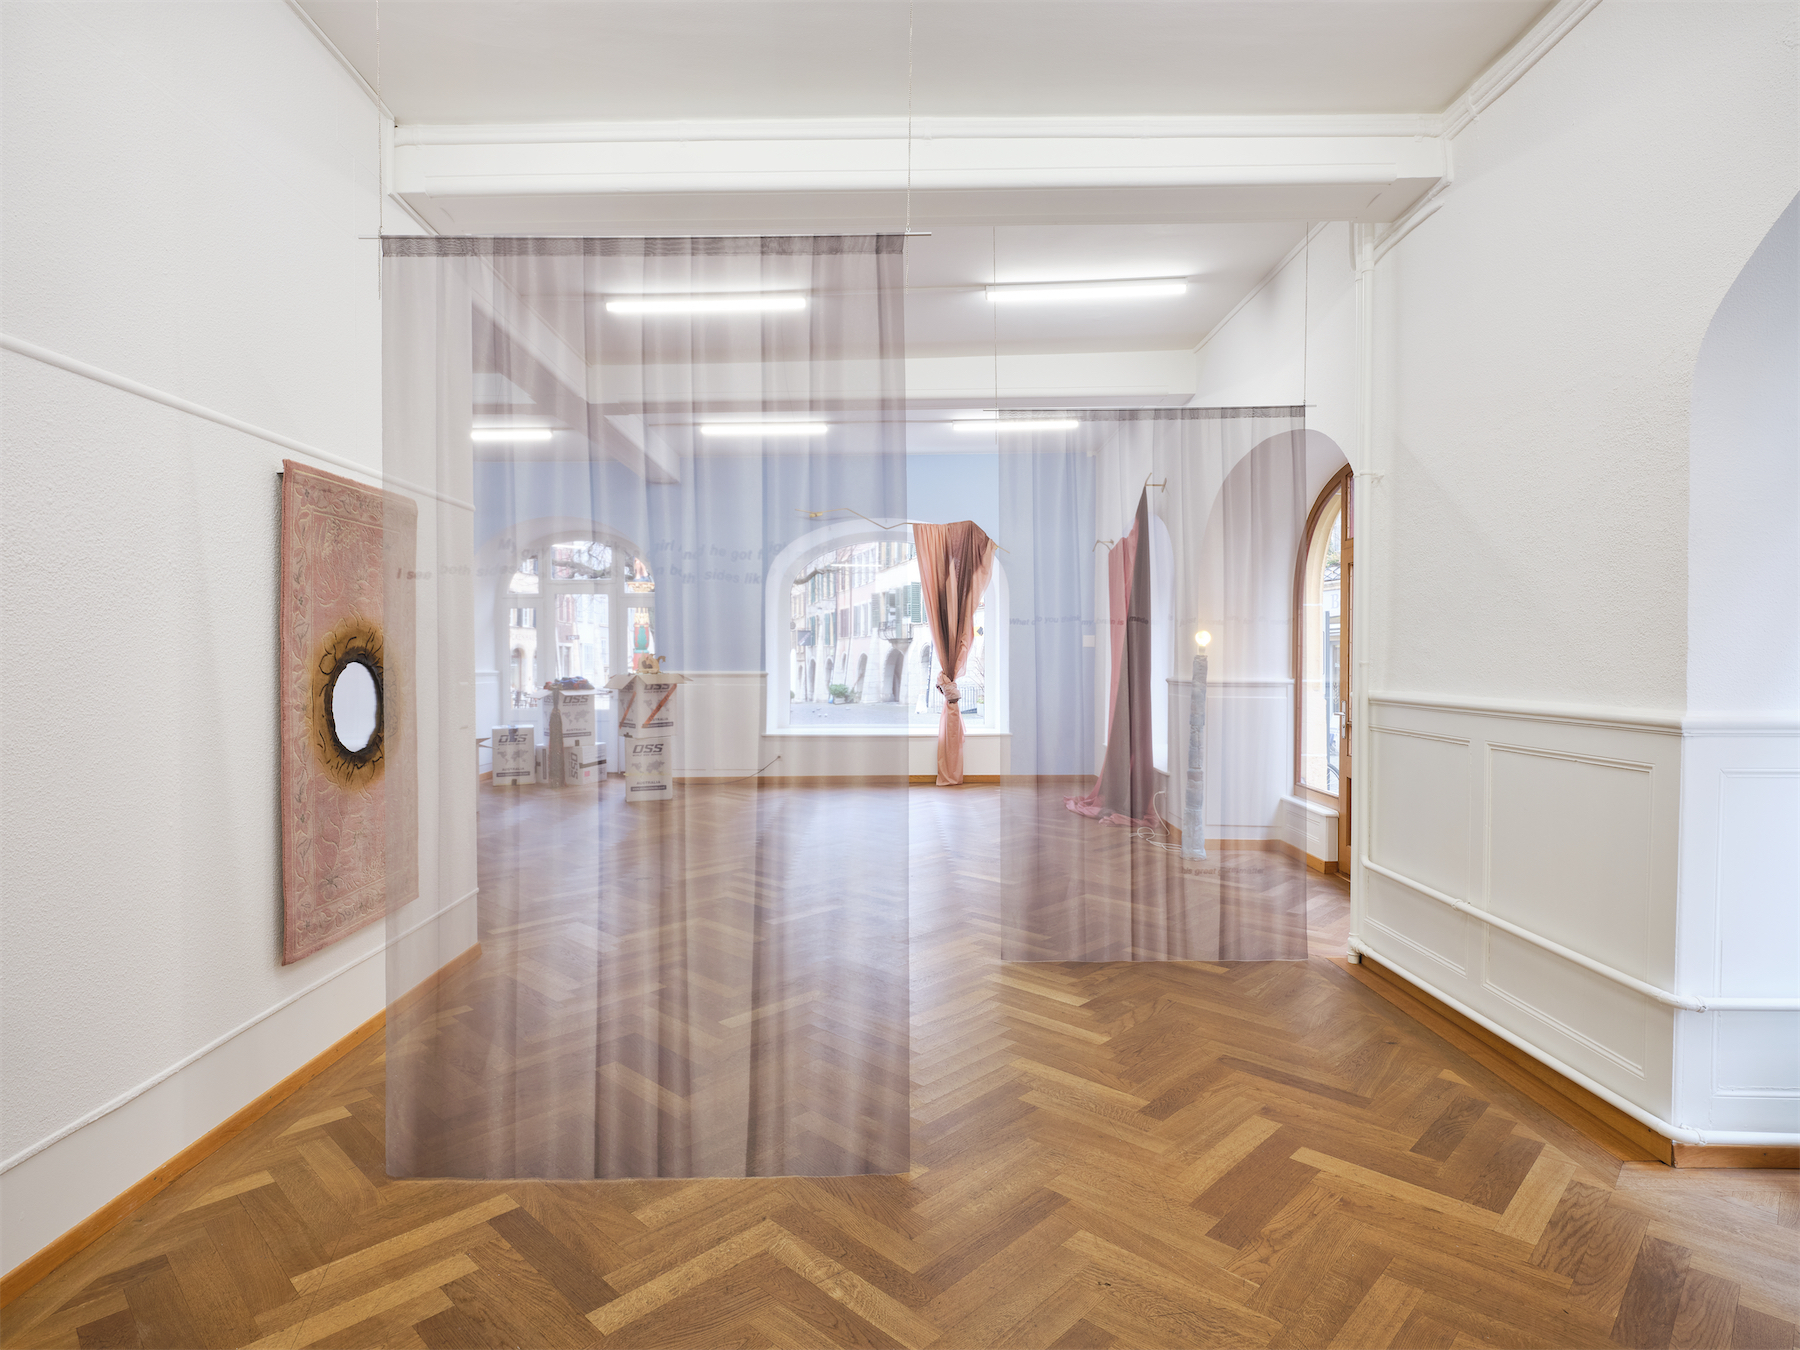 Installation views Stitches. Home as Composition, Pablo Rezzonico Bongcam, Camille Farrah Buhler (curtains), Clare Kenny (curtains in the back), KRONE COURONNE, 2022. Photo: © Nicolas Delaroche Studio